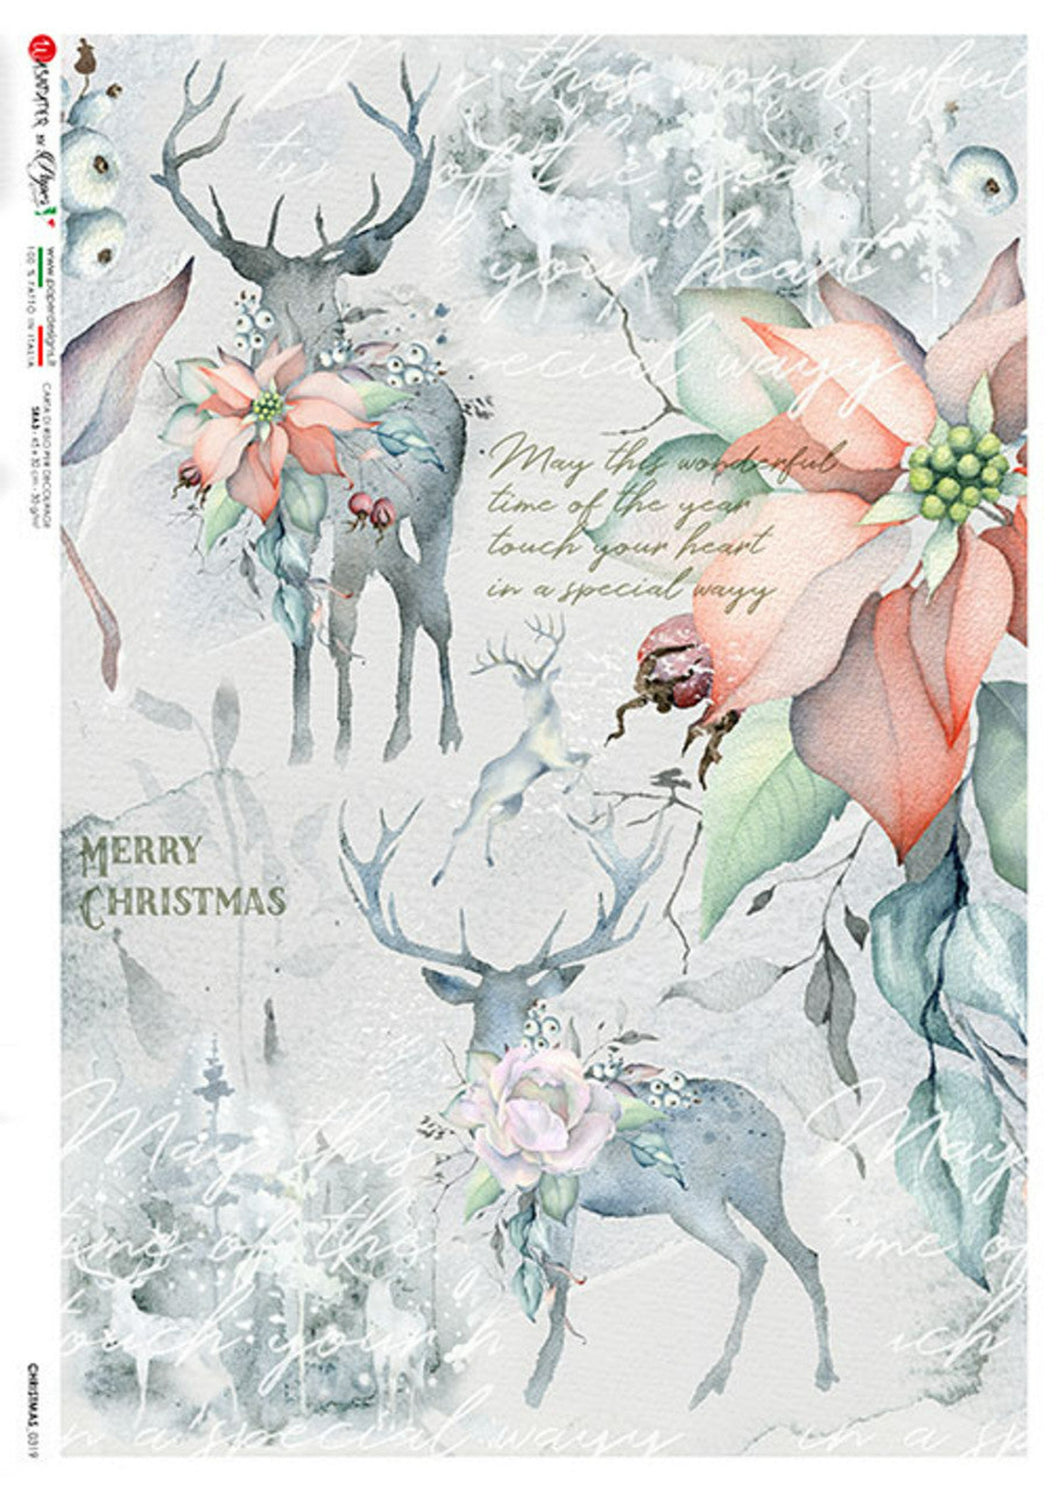 Christmas 0319 Paper Designs Washipaper, Snowy, Pastel Winter Landscape with Poinsettias, Deer